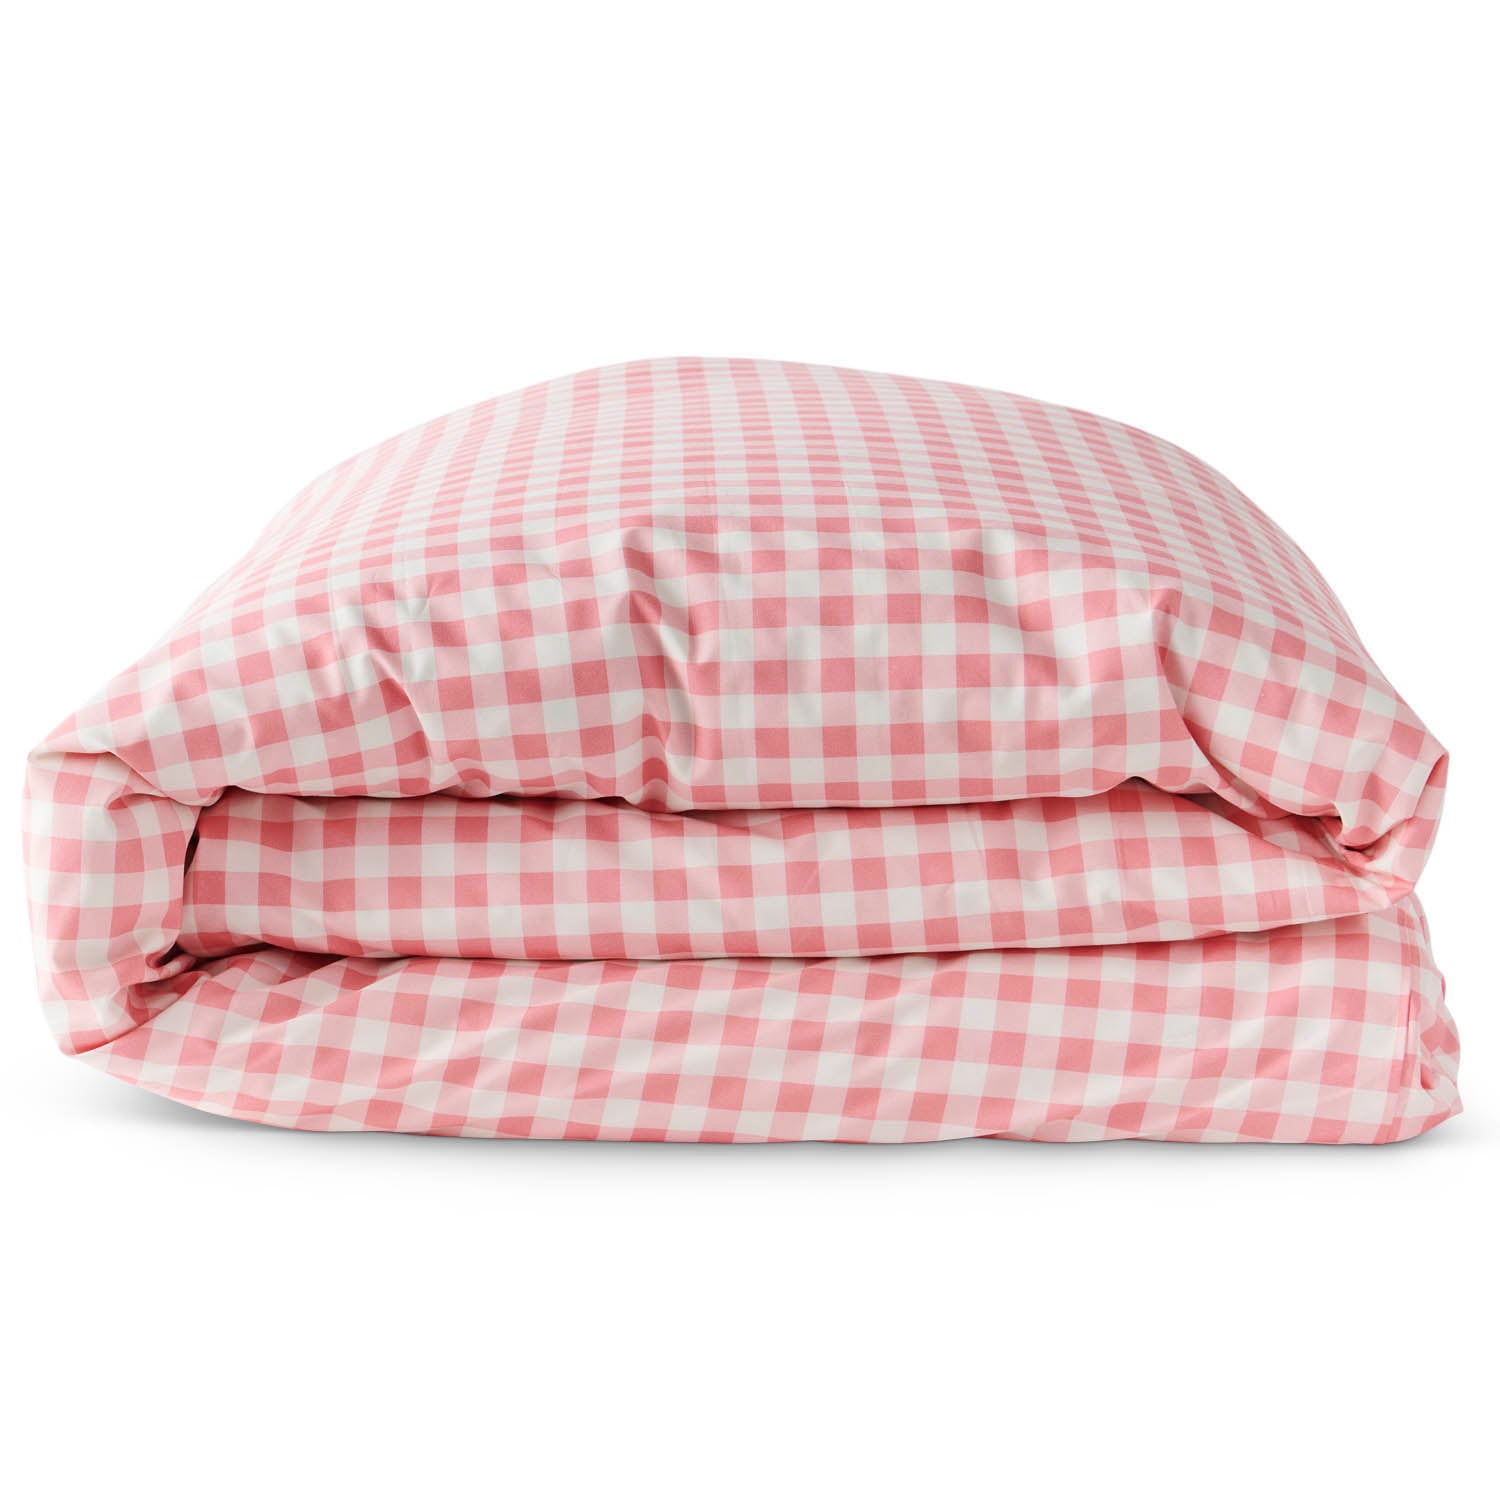 Organic Cotton Quilt Cover - Gingham Candy